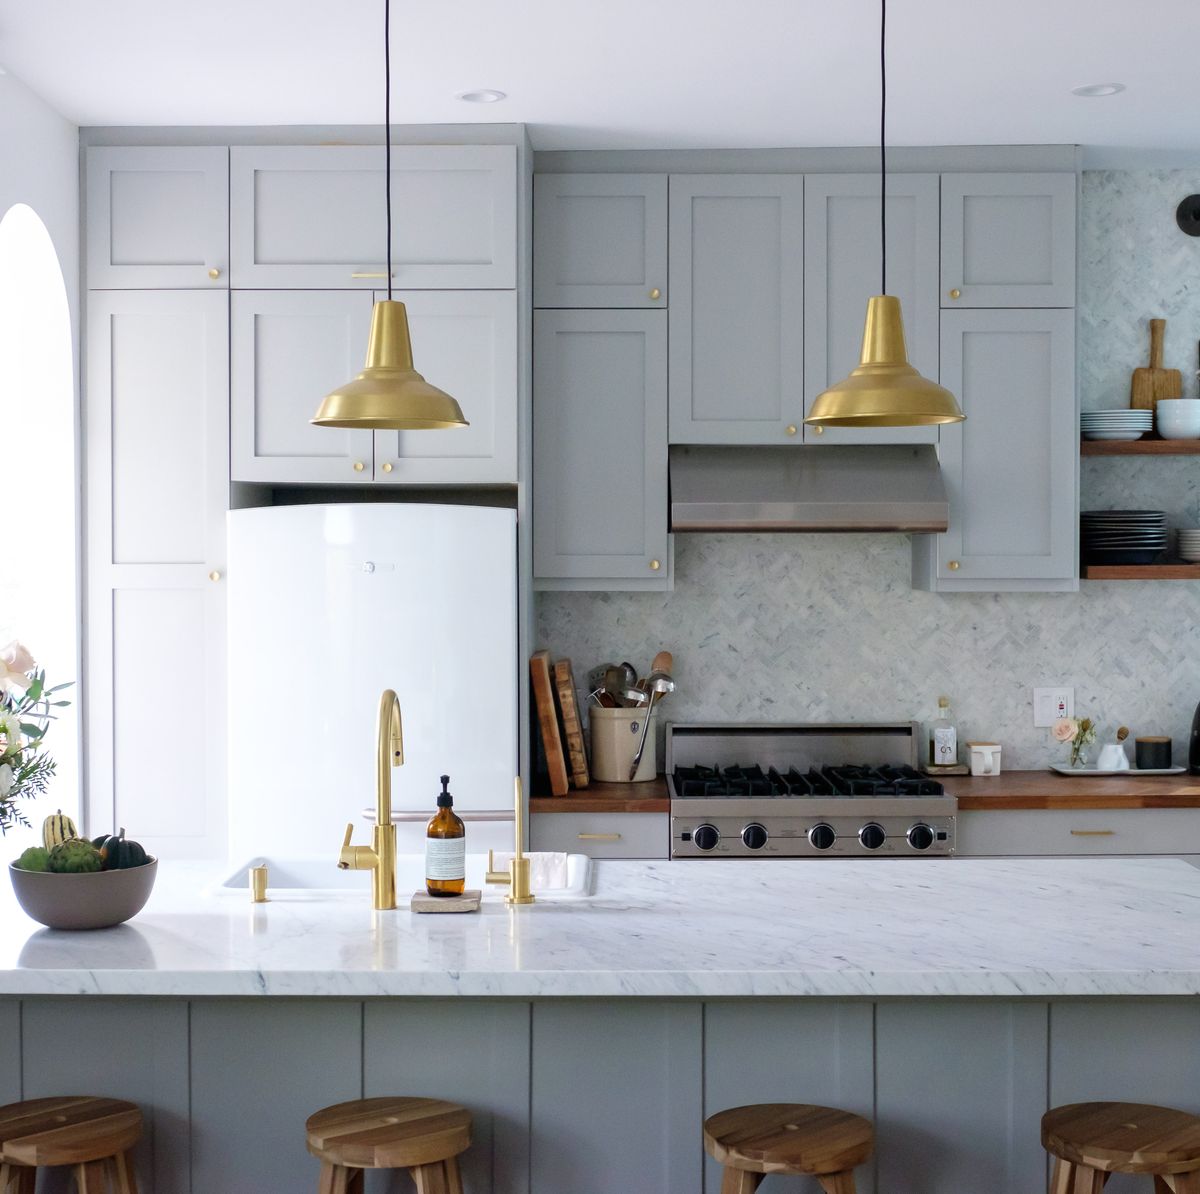 Why IKEA Kitchens Are So Popular - 10 Reasons Designers Love Ikea